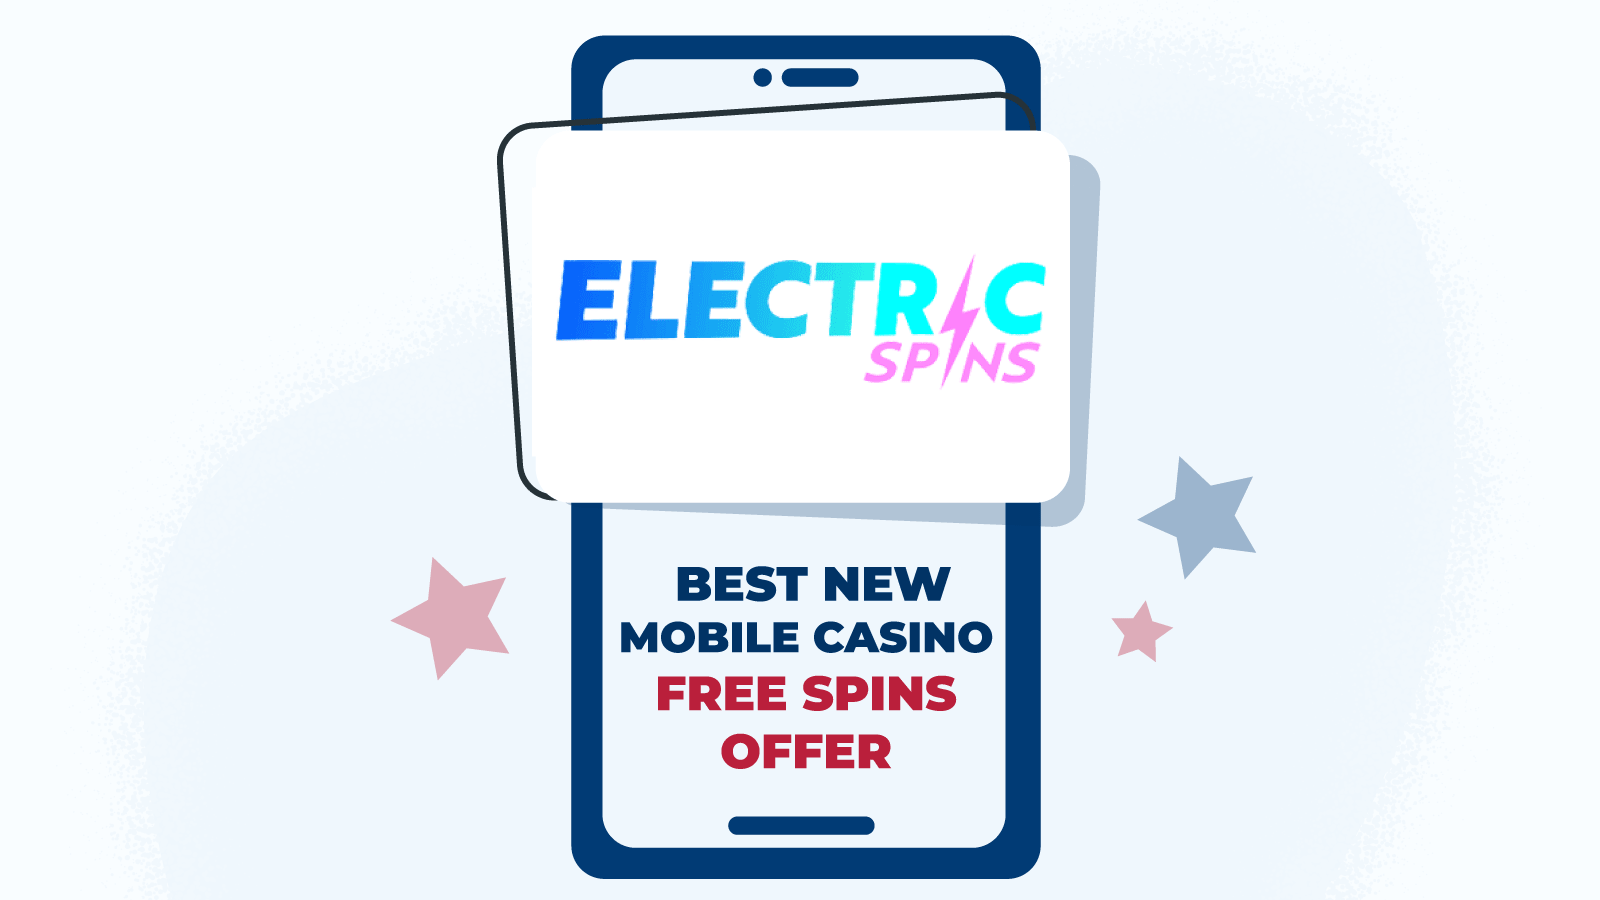 Electric Spins – Best New Mobile Casino Free Spins Offer